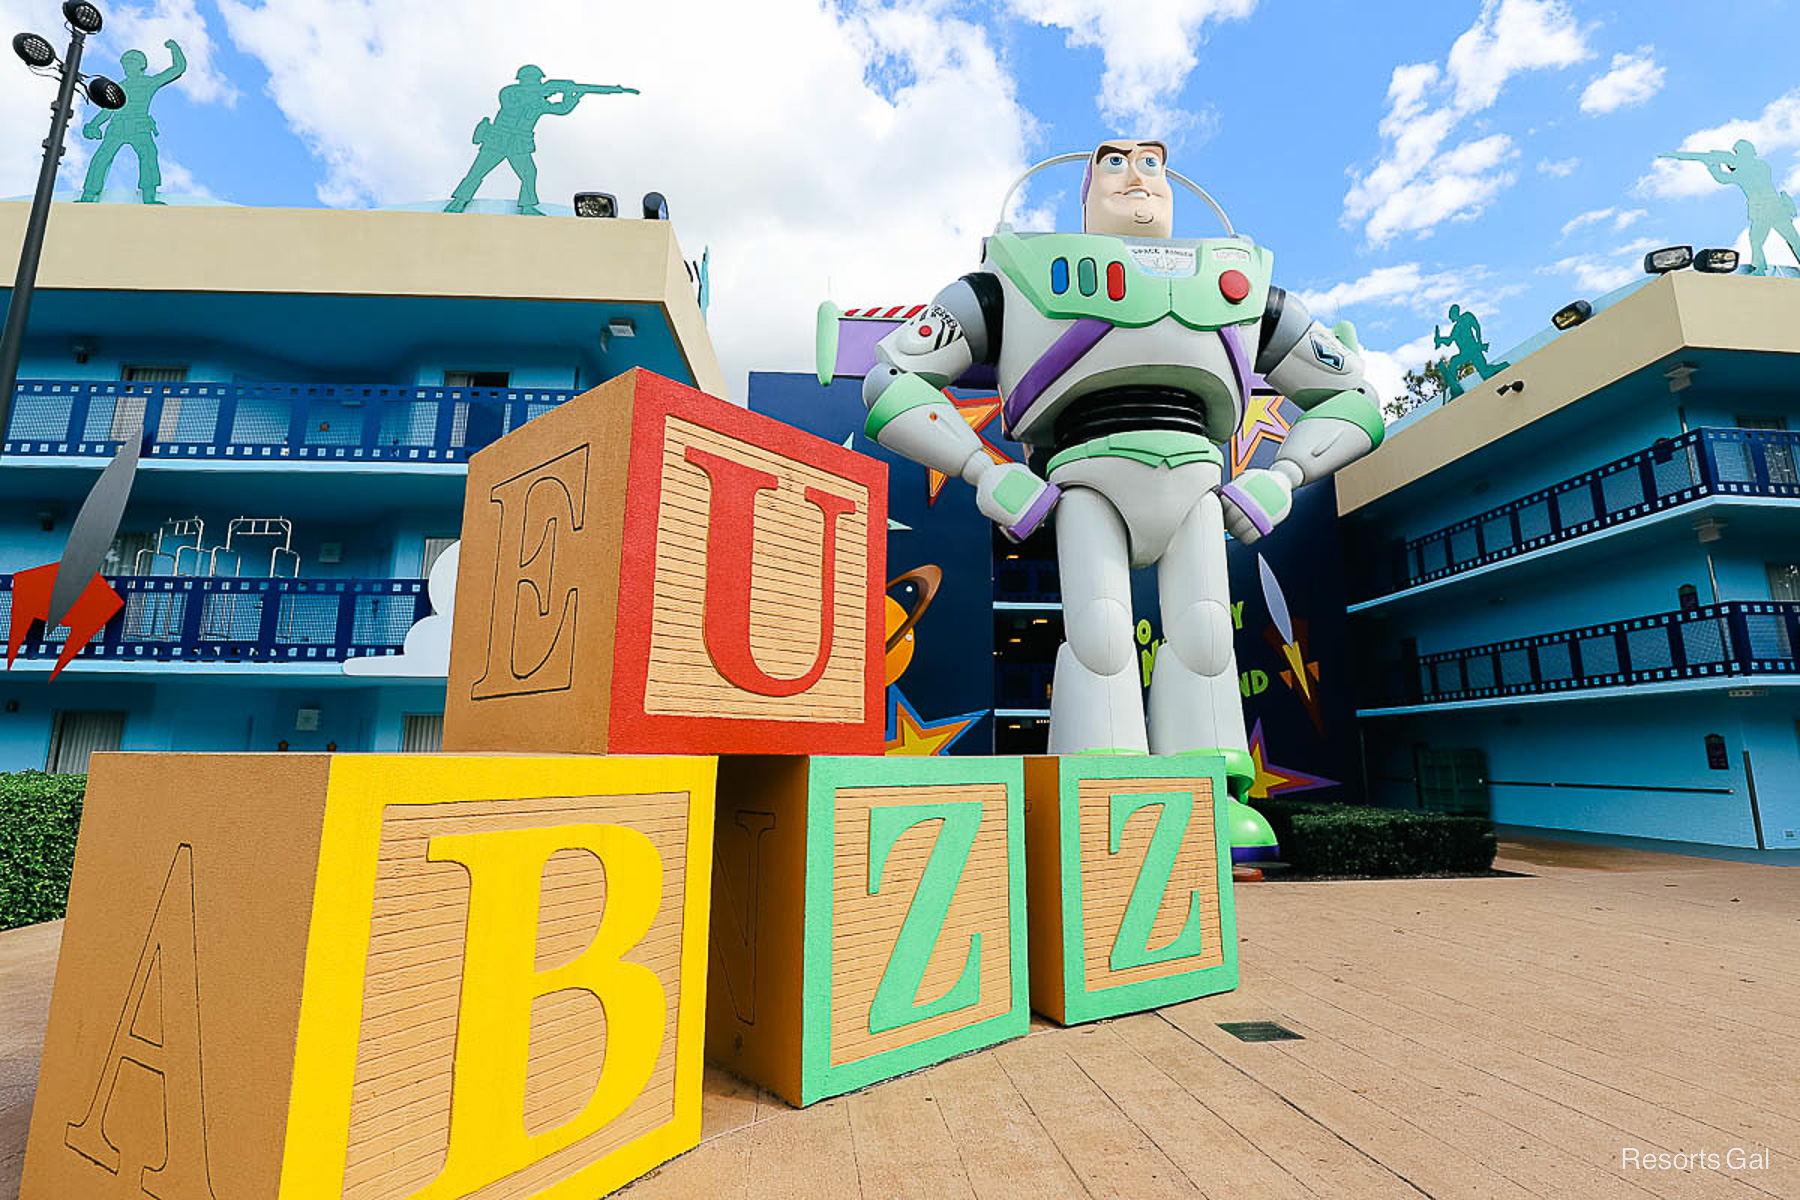 Buzz Light year with giant blocks beside him that spell out Buzz 